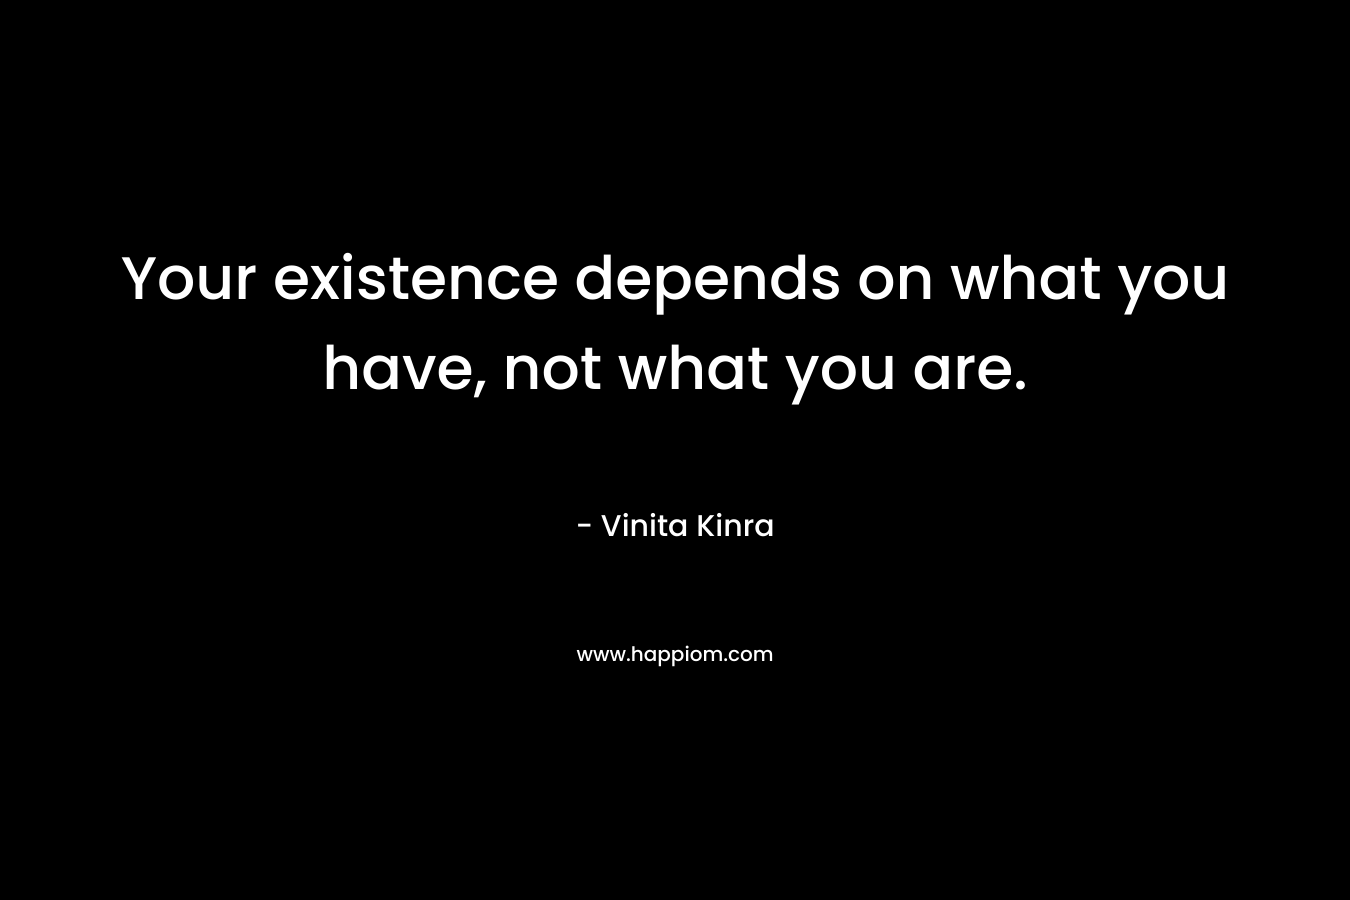 Your existence depends on what you have, not what you are.